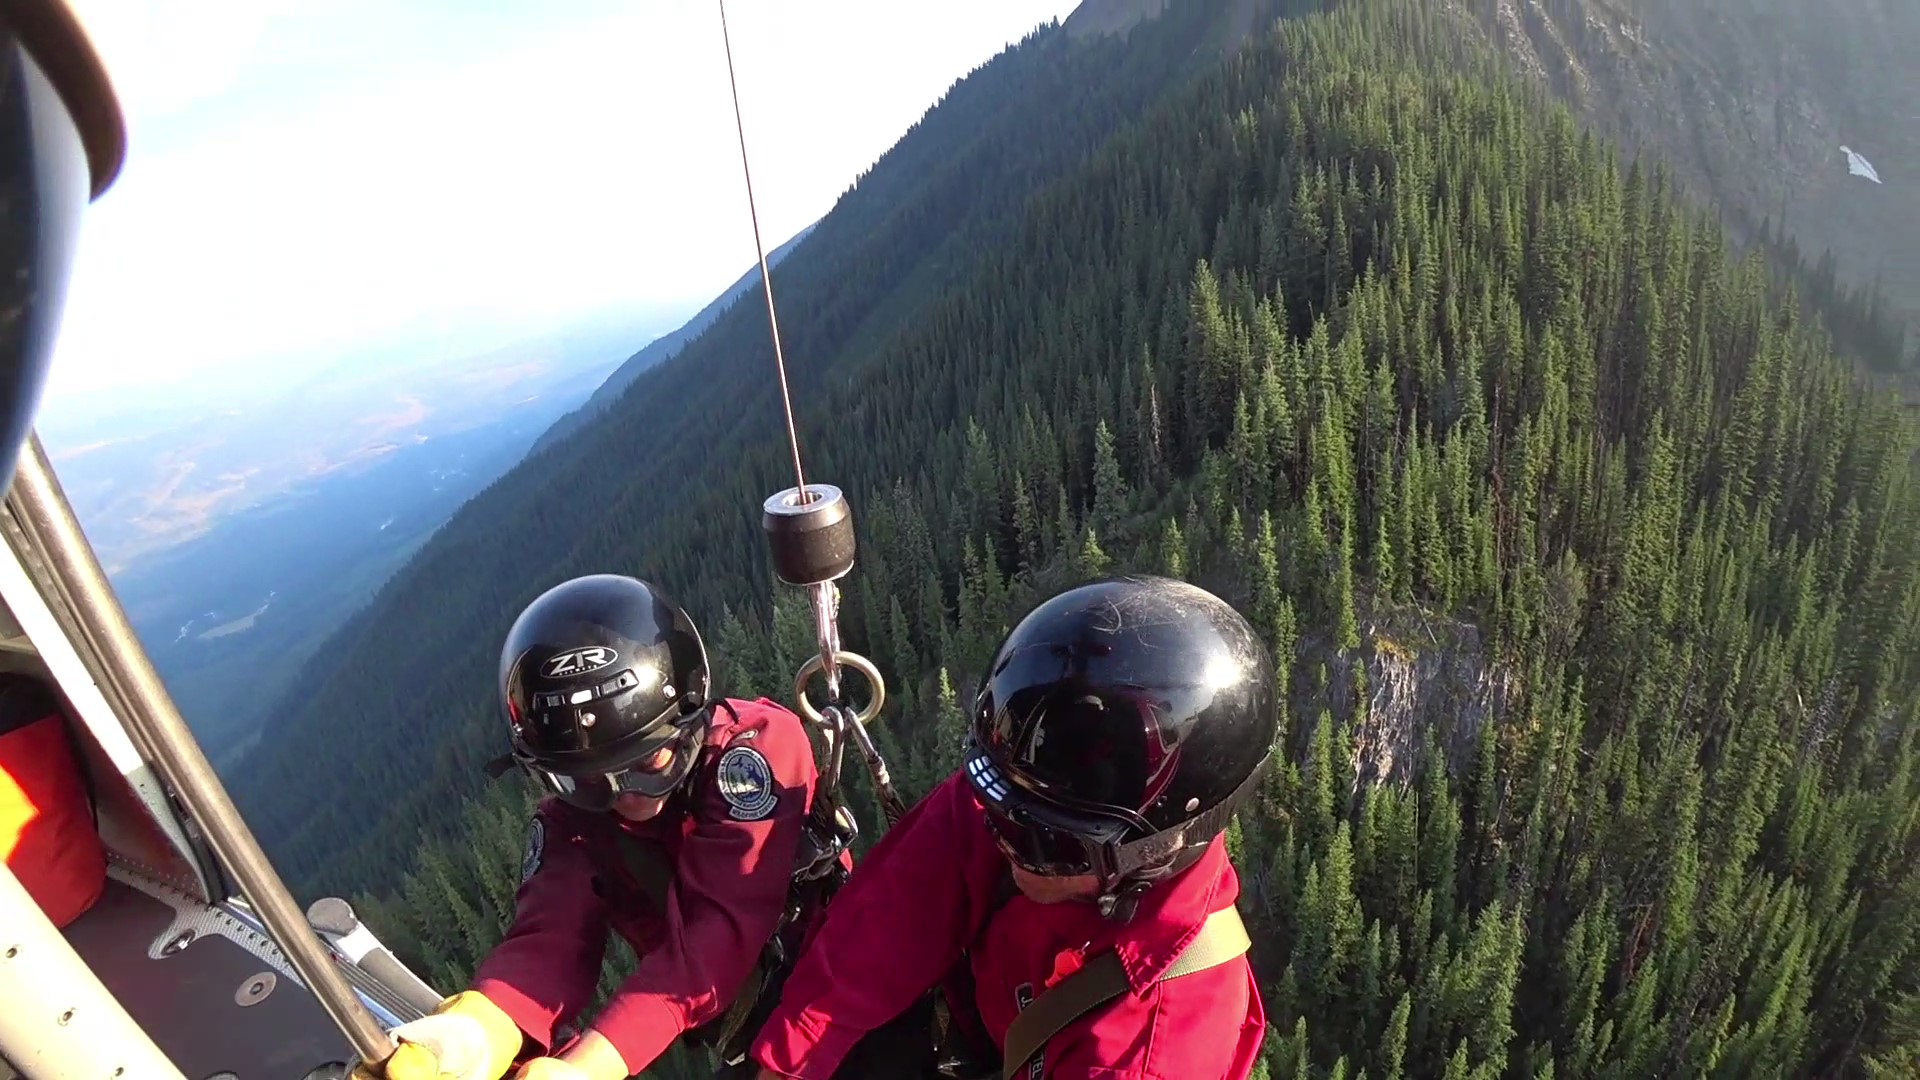 two members are lowered from an aircraft above a forest